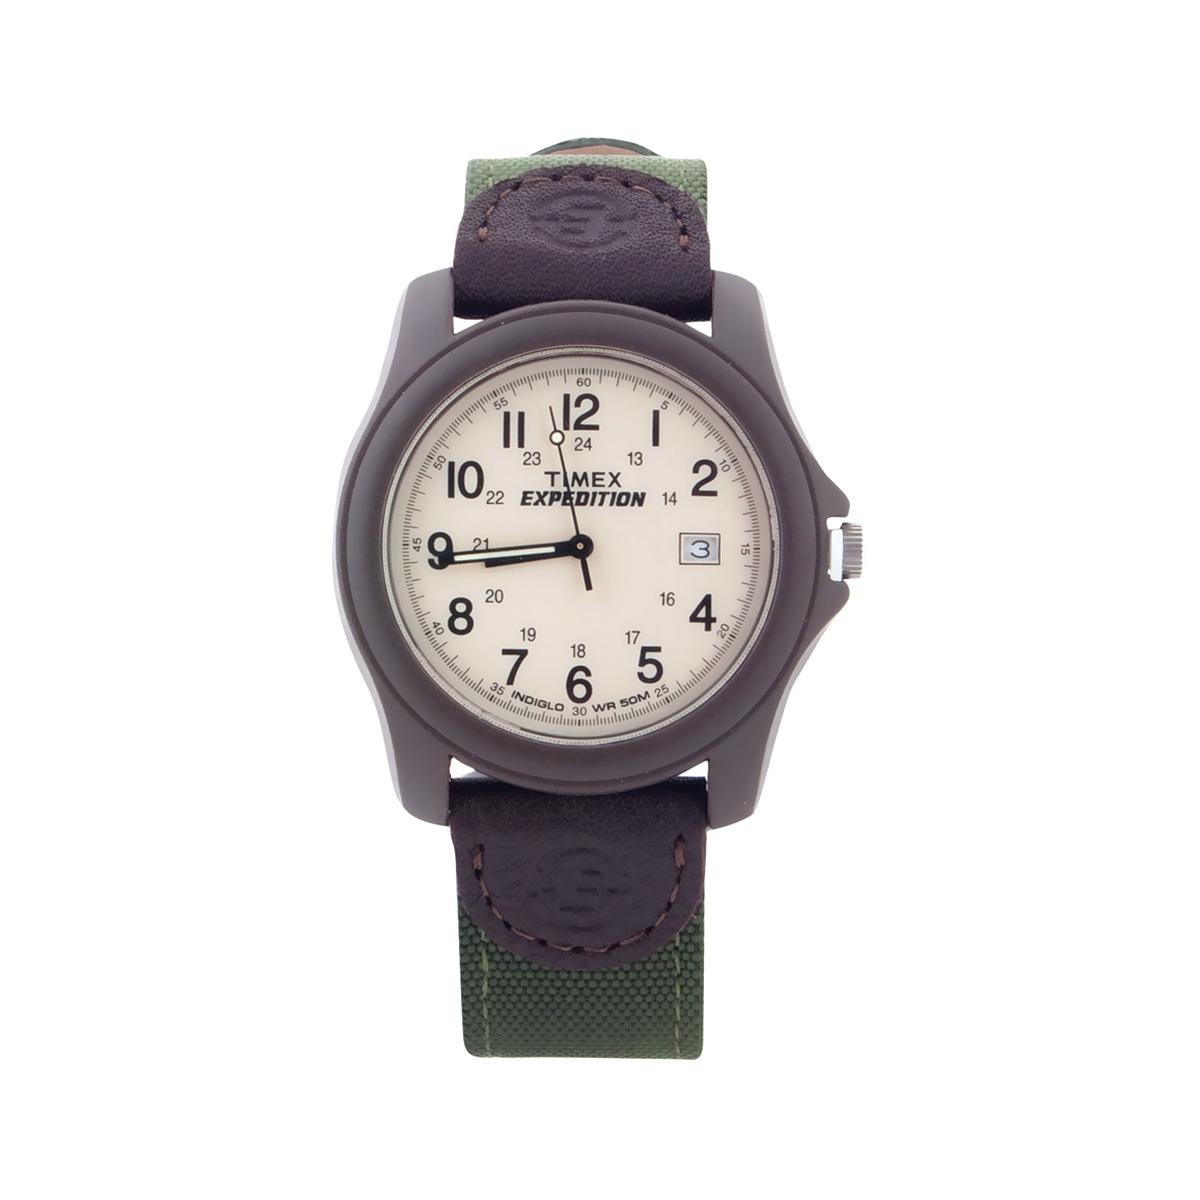  Expedition Camper Watch